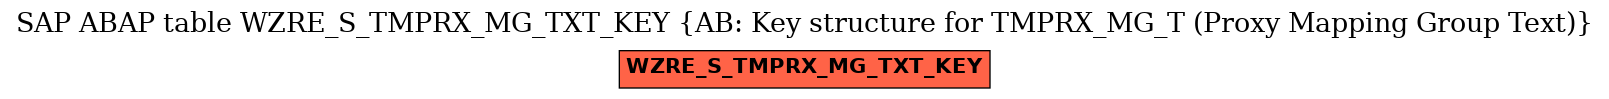 E-R Diagram for table WZRE_S_TMPRX_MG_TXT_KEY (AB: Key structure for TMPRX_MG_T (Proxy Mapping Group Text))